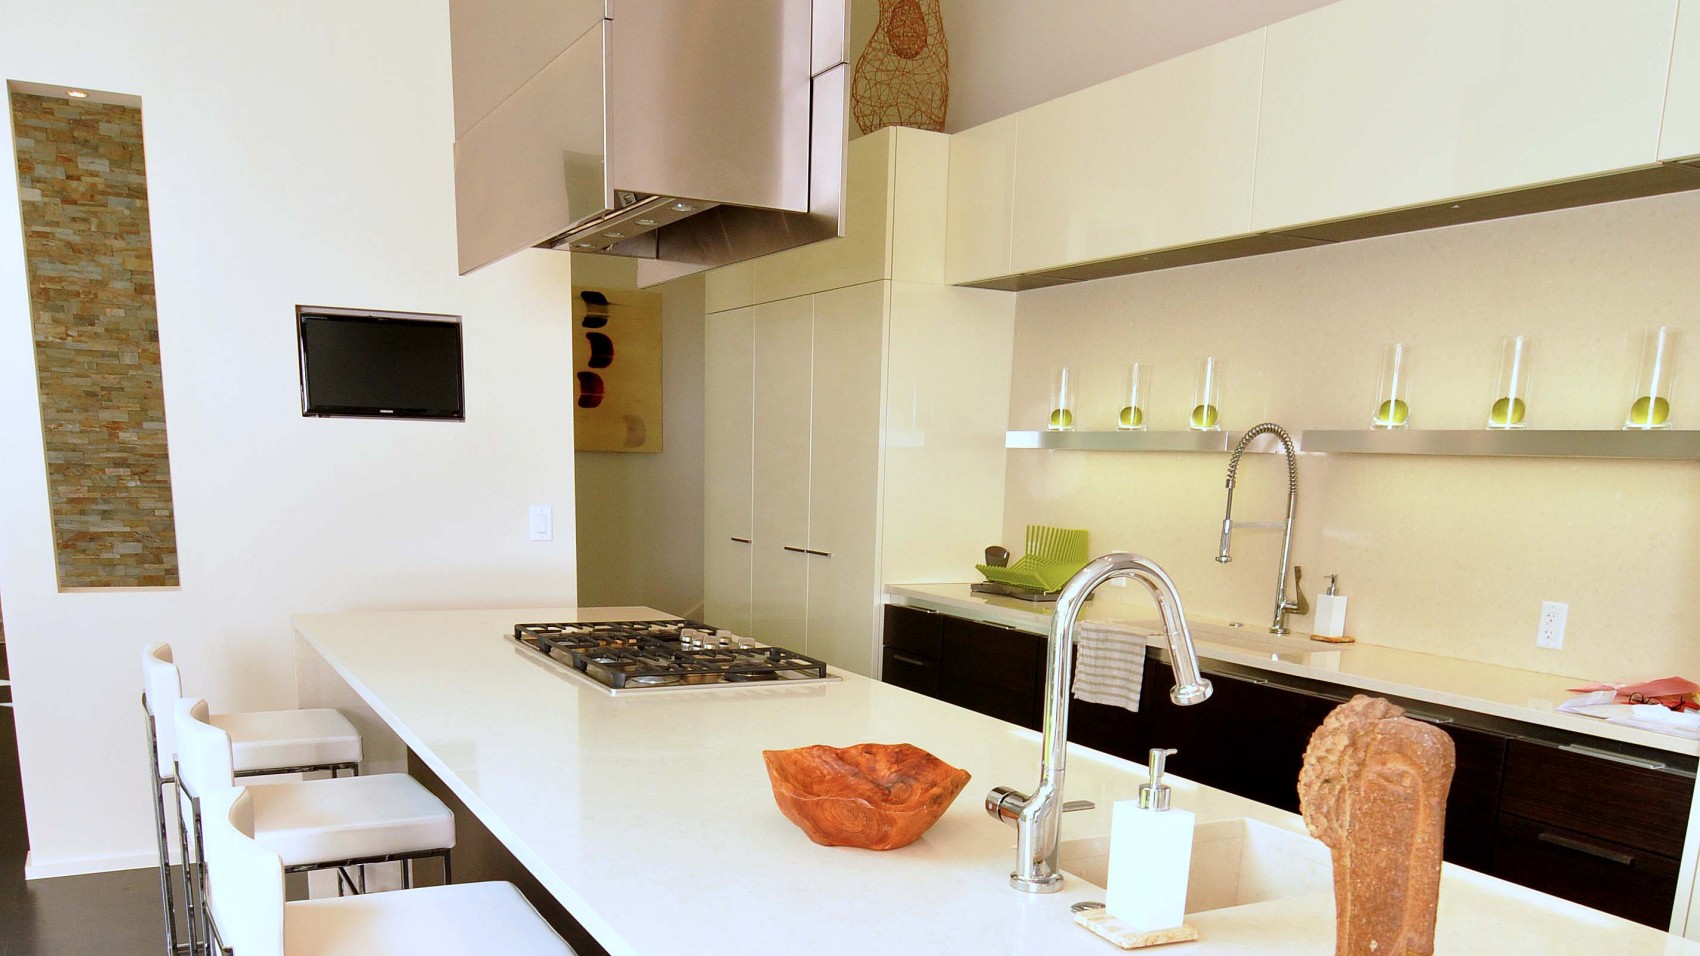 Top 5 Mistakes that Designers and Contractors make in Kitchen Designs